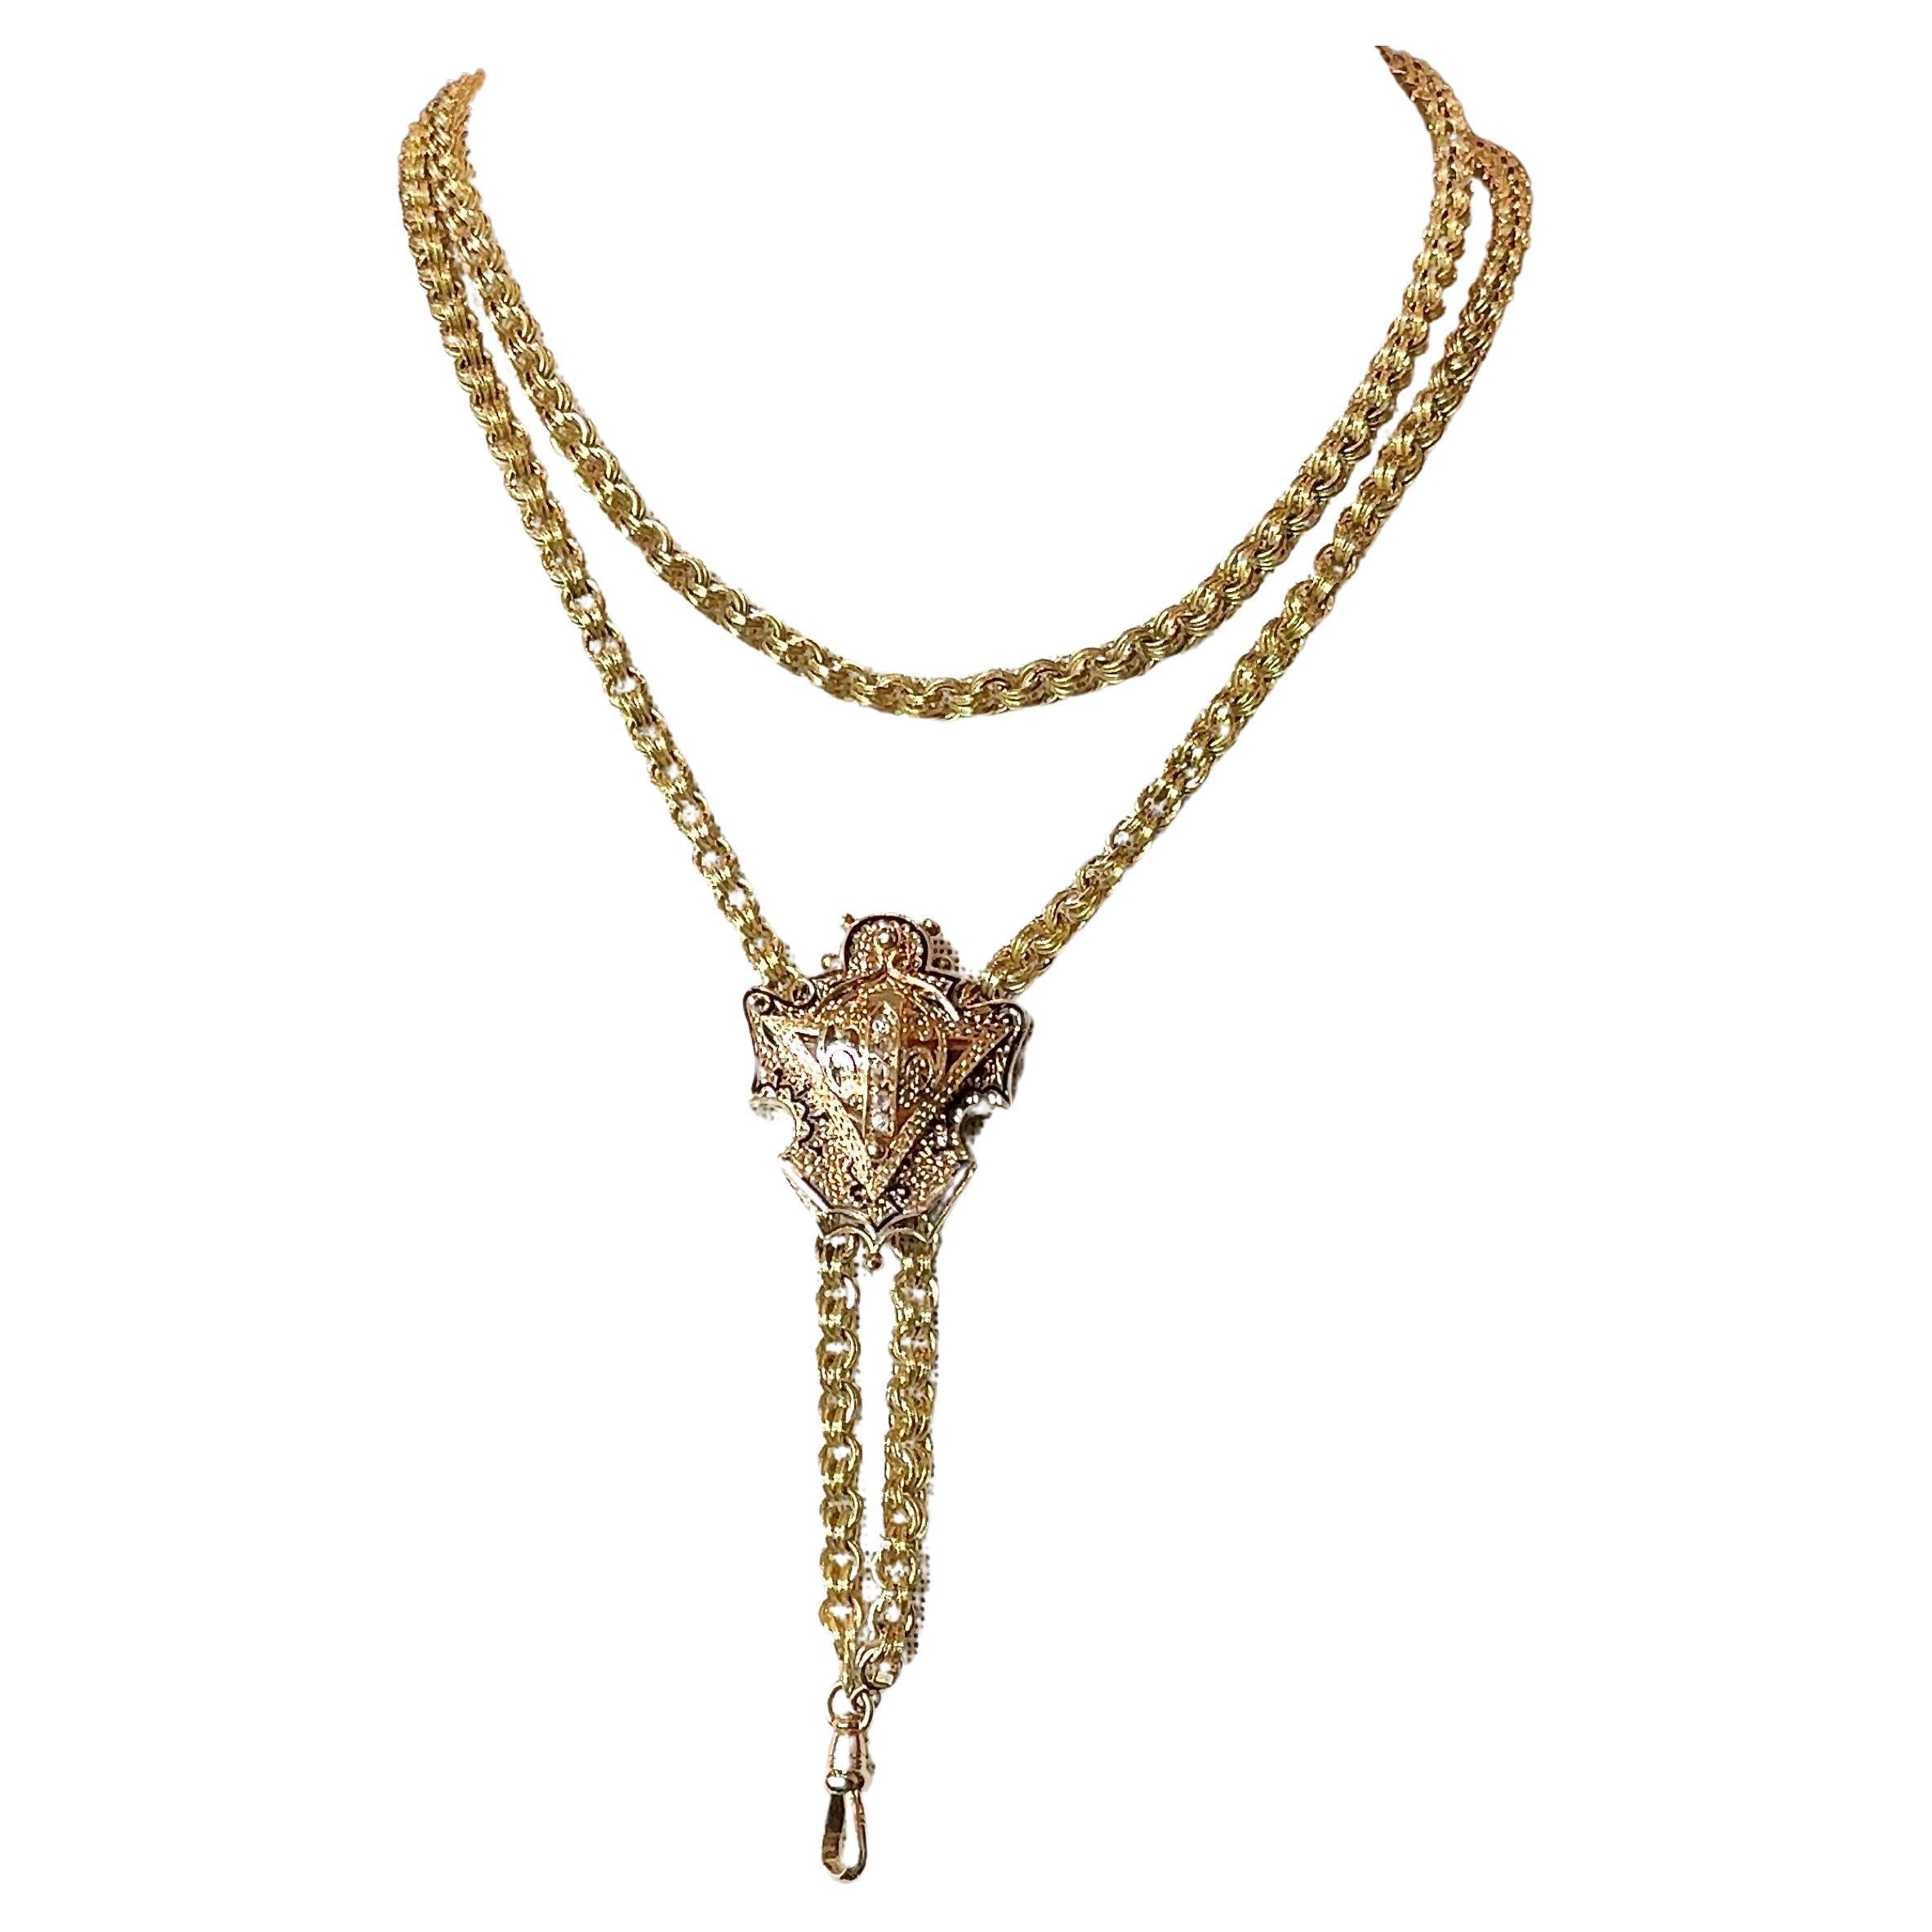 Antique 15KT Yellow Gold Chain with 14K Gold Diamond Slide For Sale